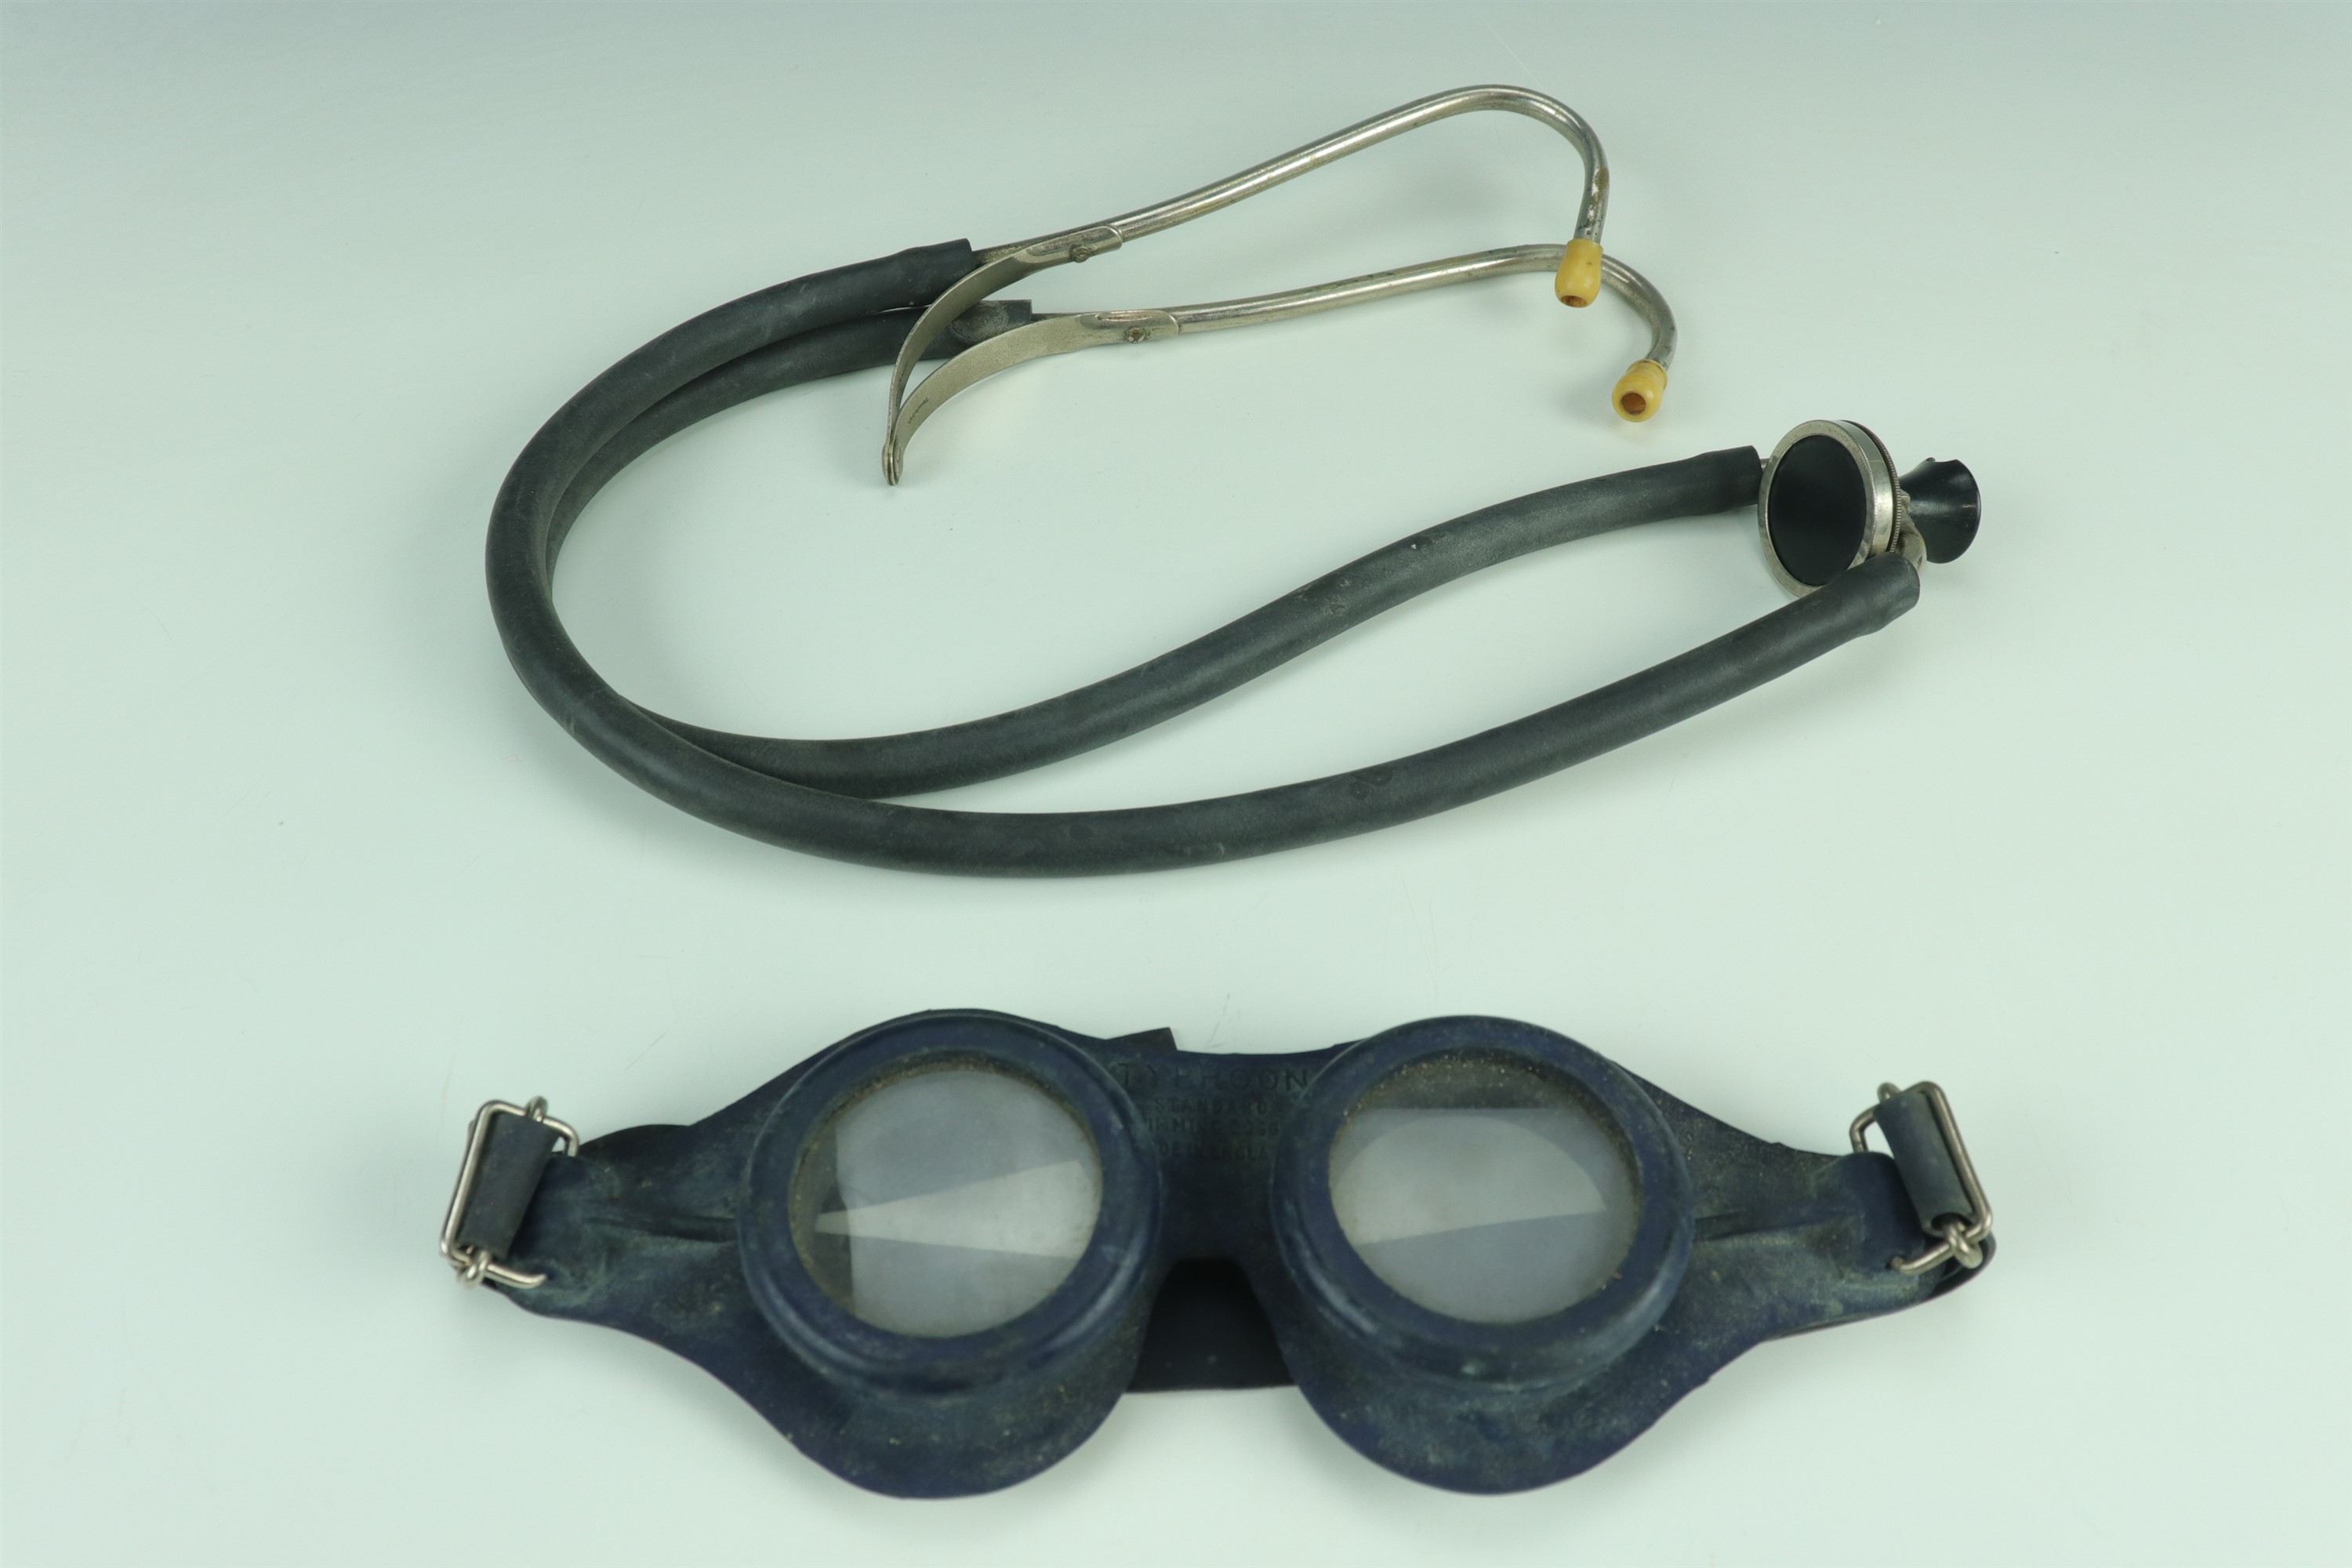 A set of vintage Typhoon swimming goggles together with a medical stethoscope